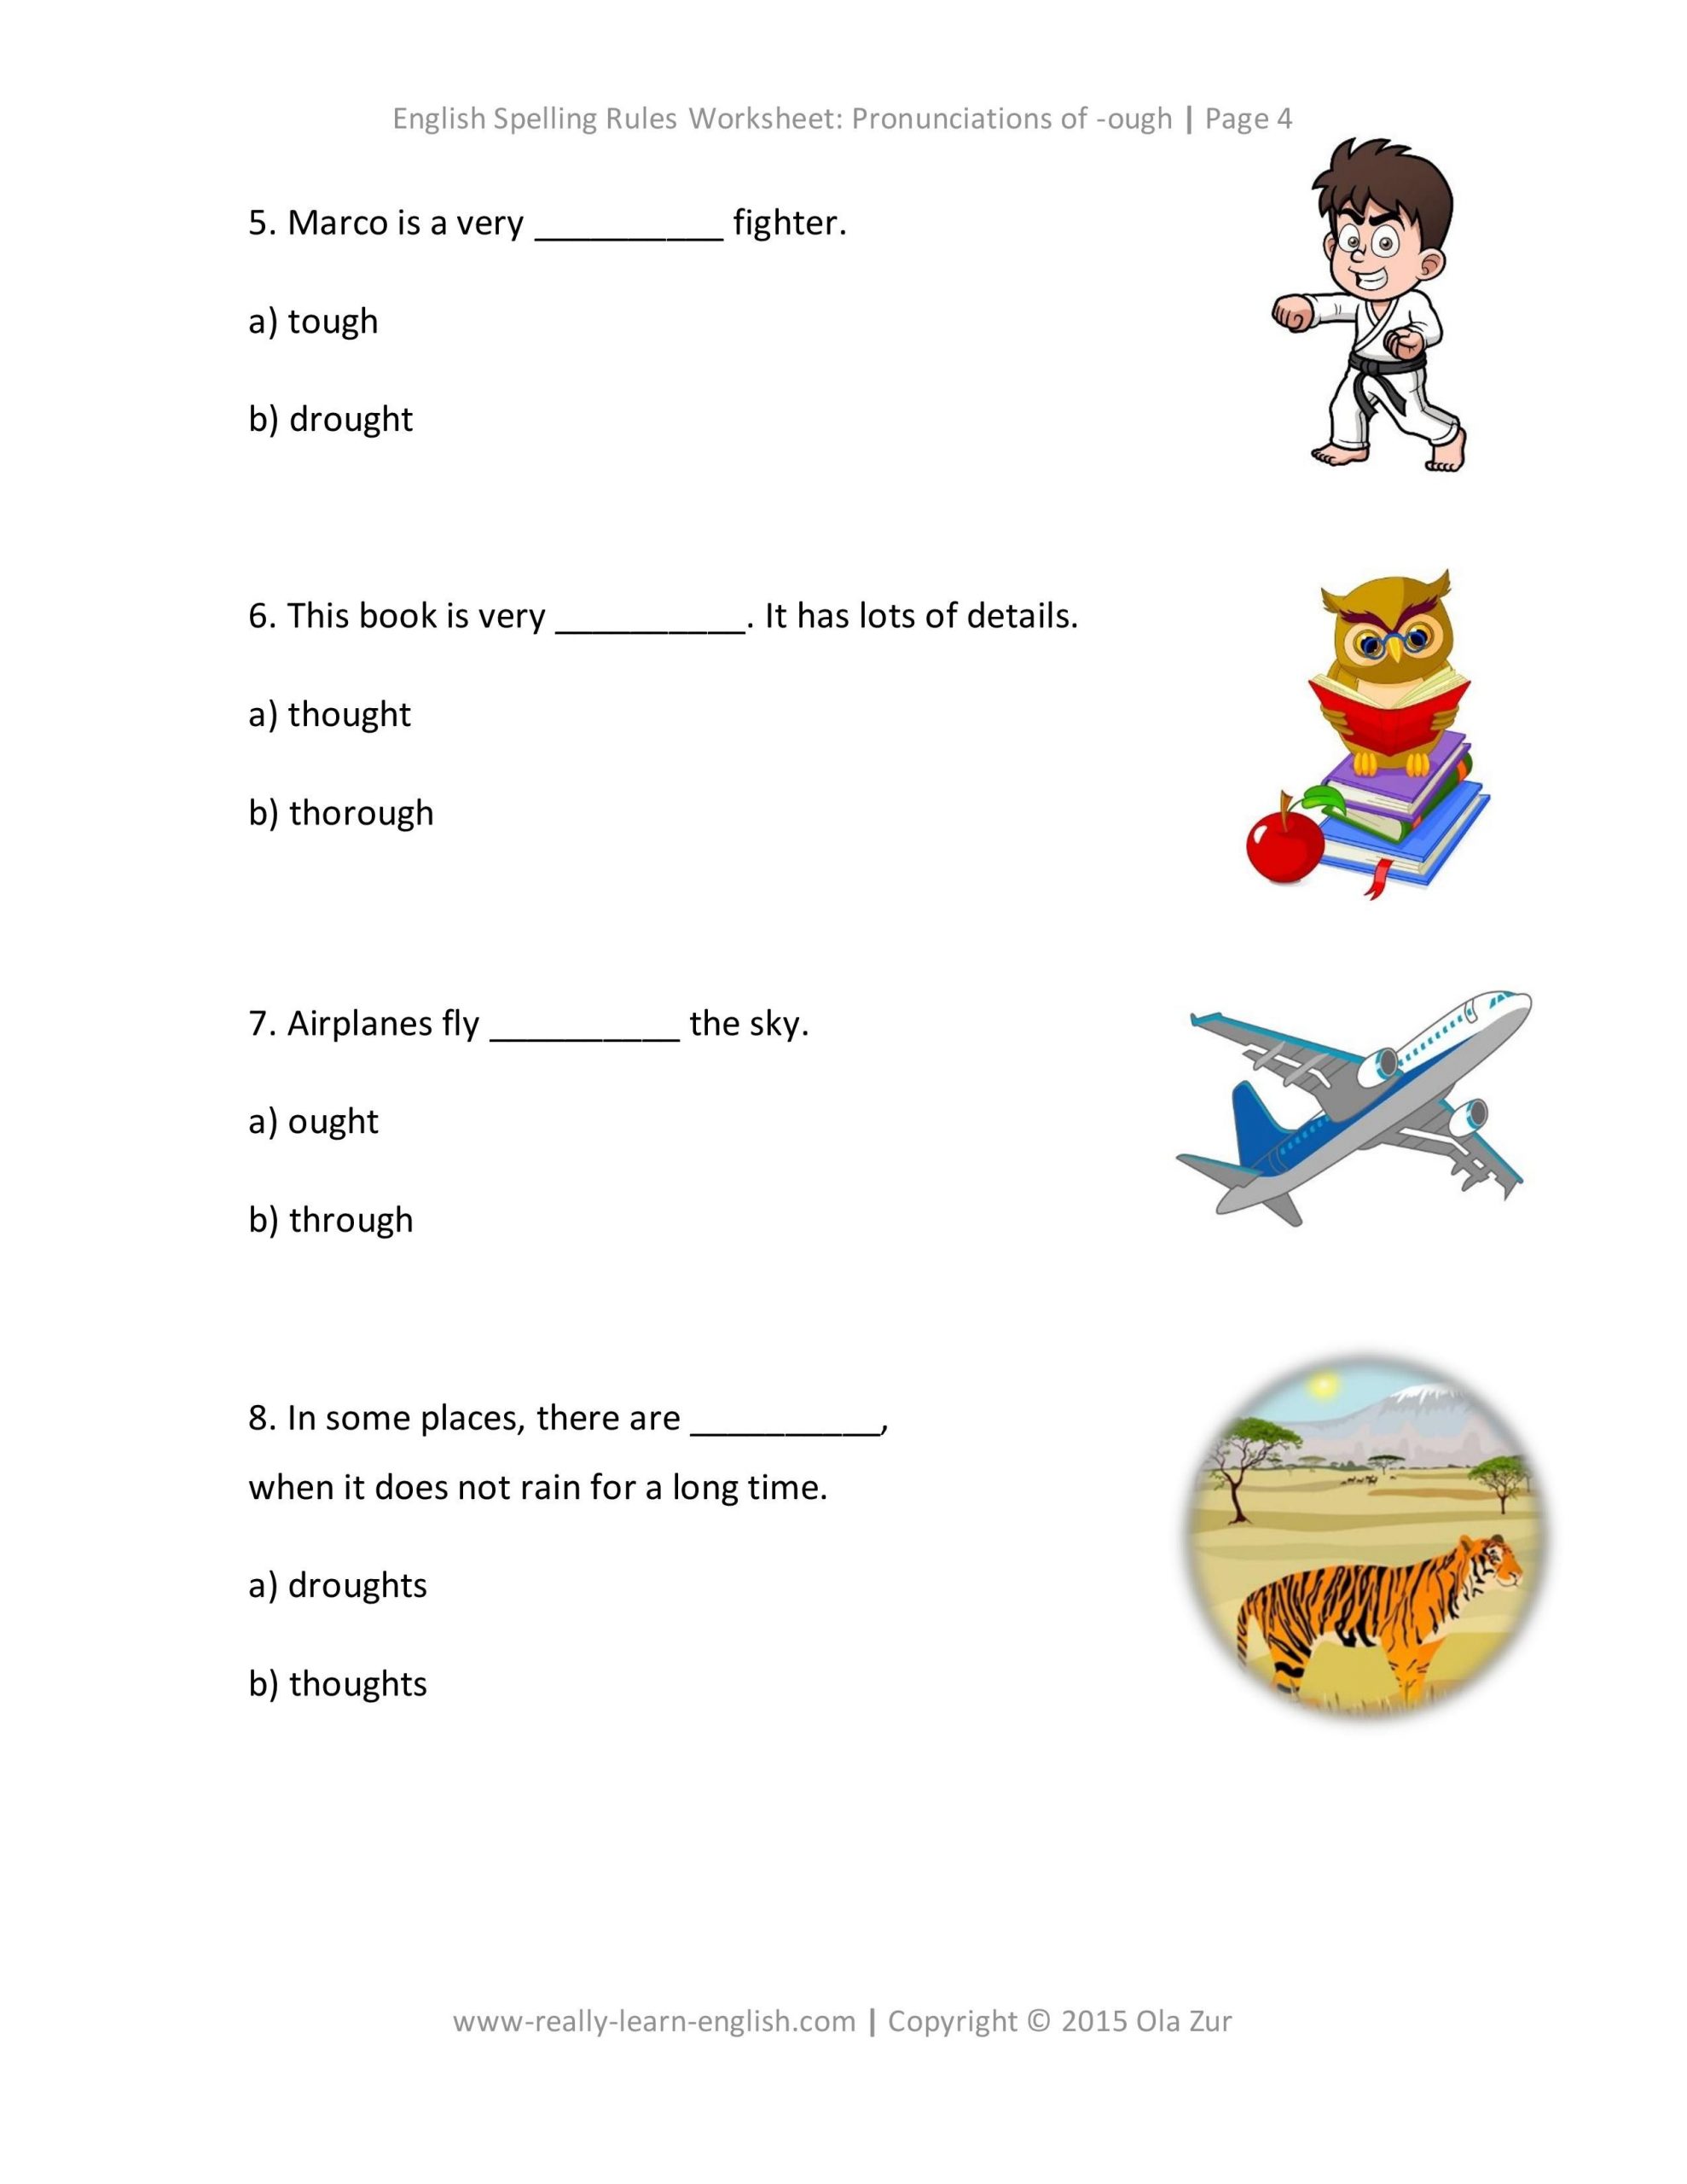 The Complete List Of English Spelling Rules Lesson 7 